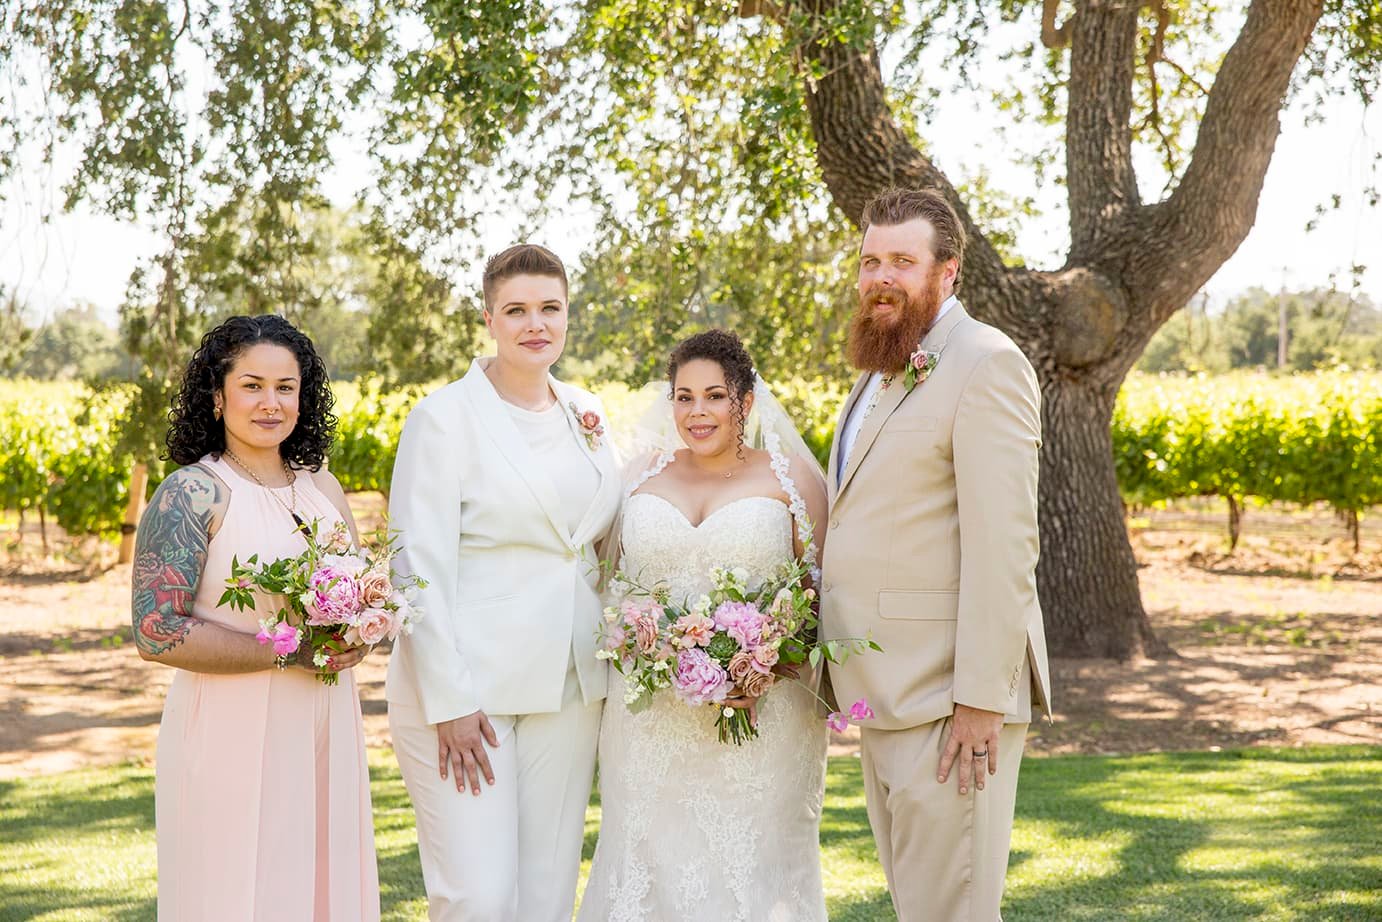 Brides with Maid of Honor and Best Man at Roblar Winery in Santa Ynez, CA 